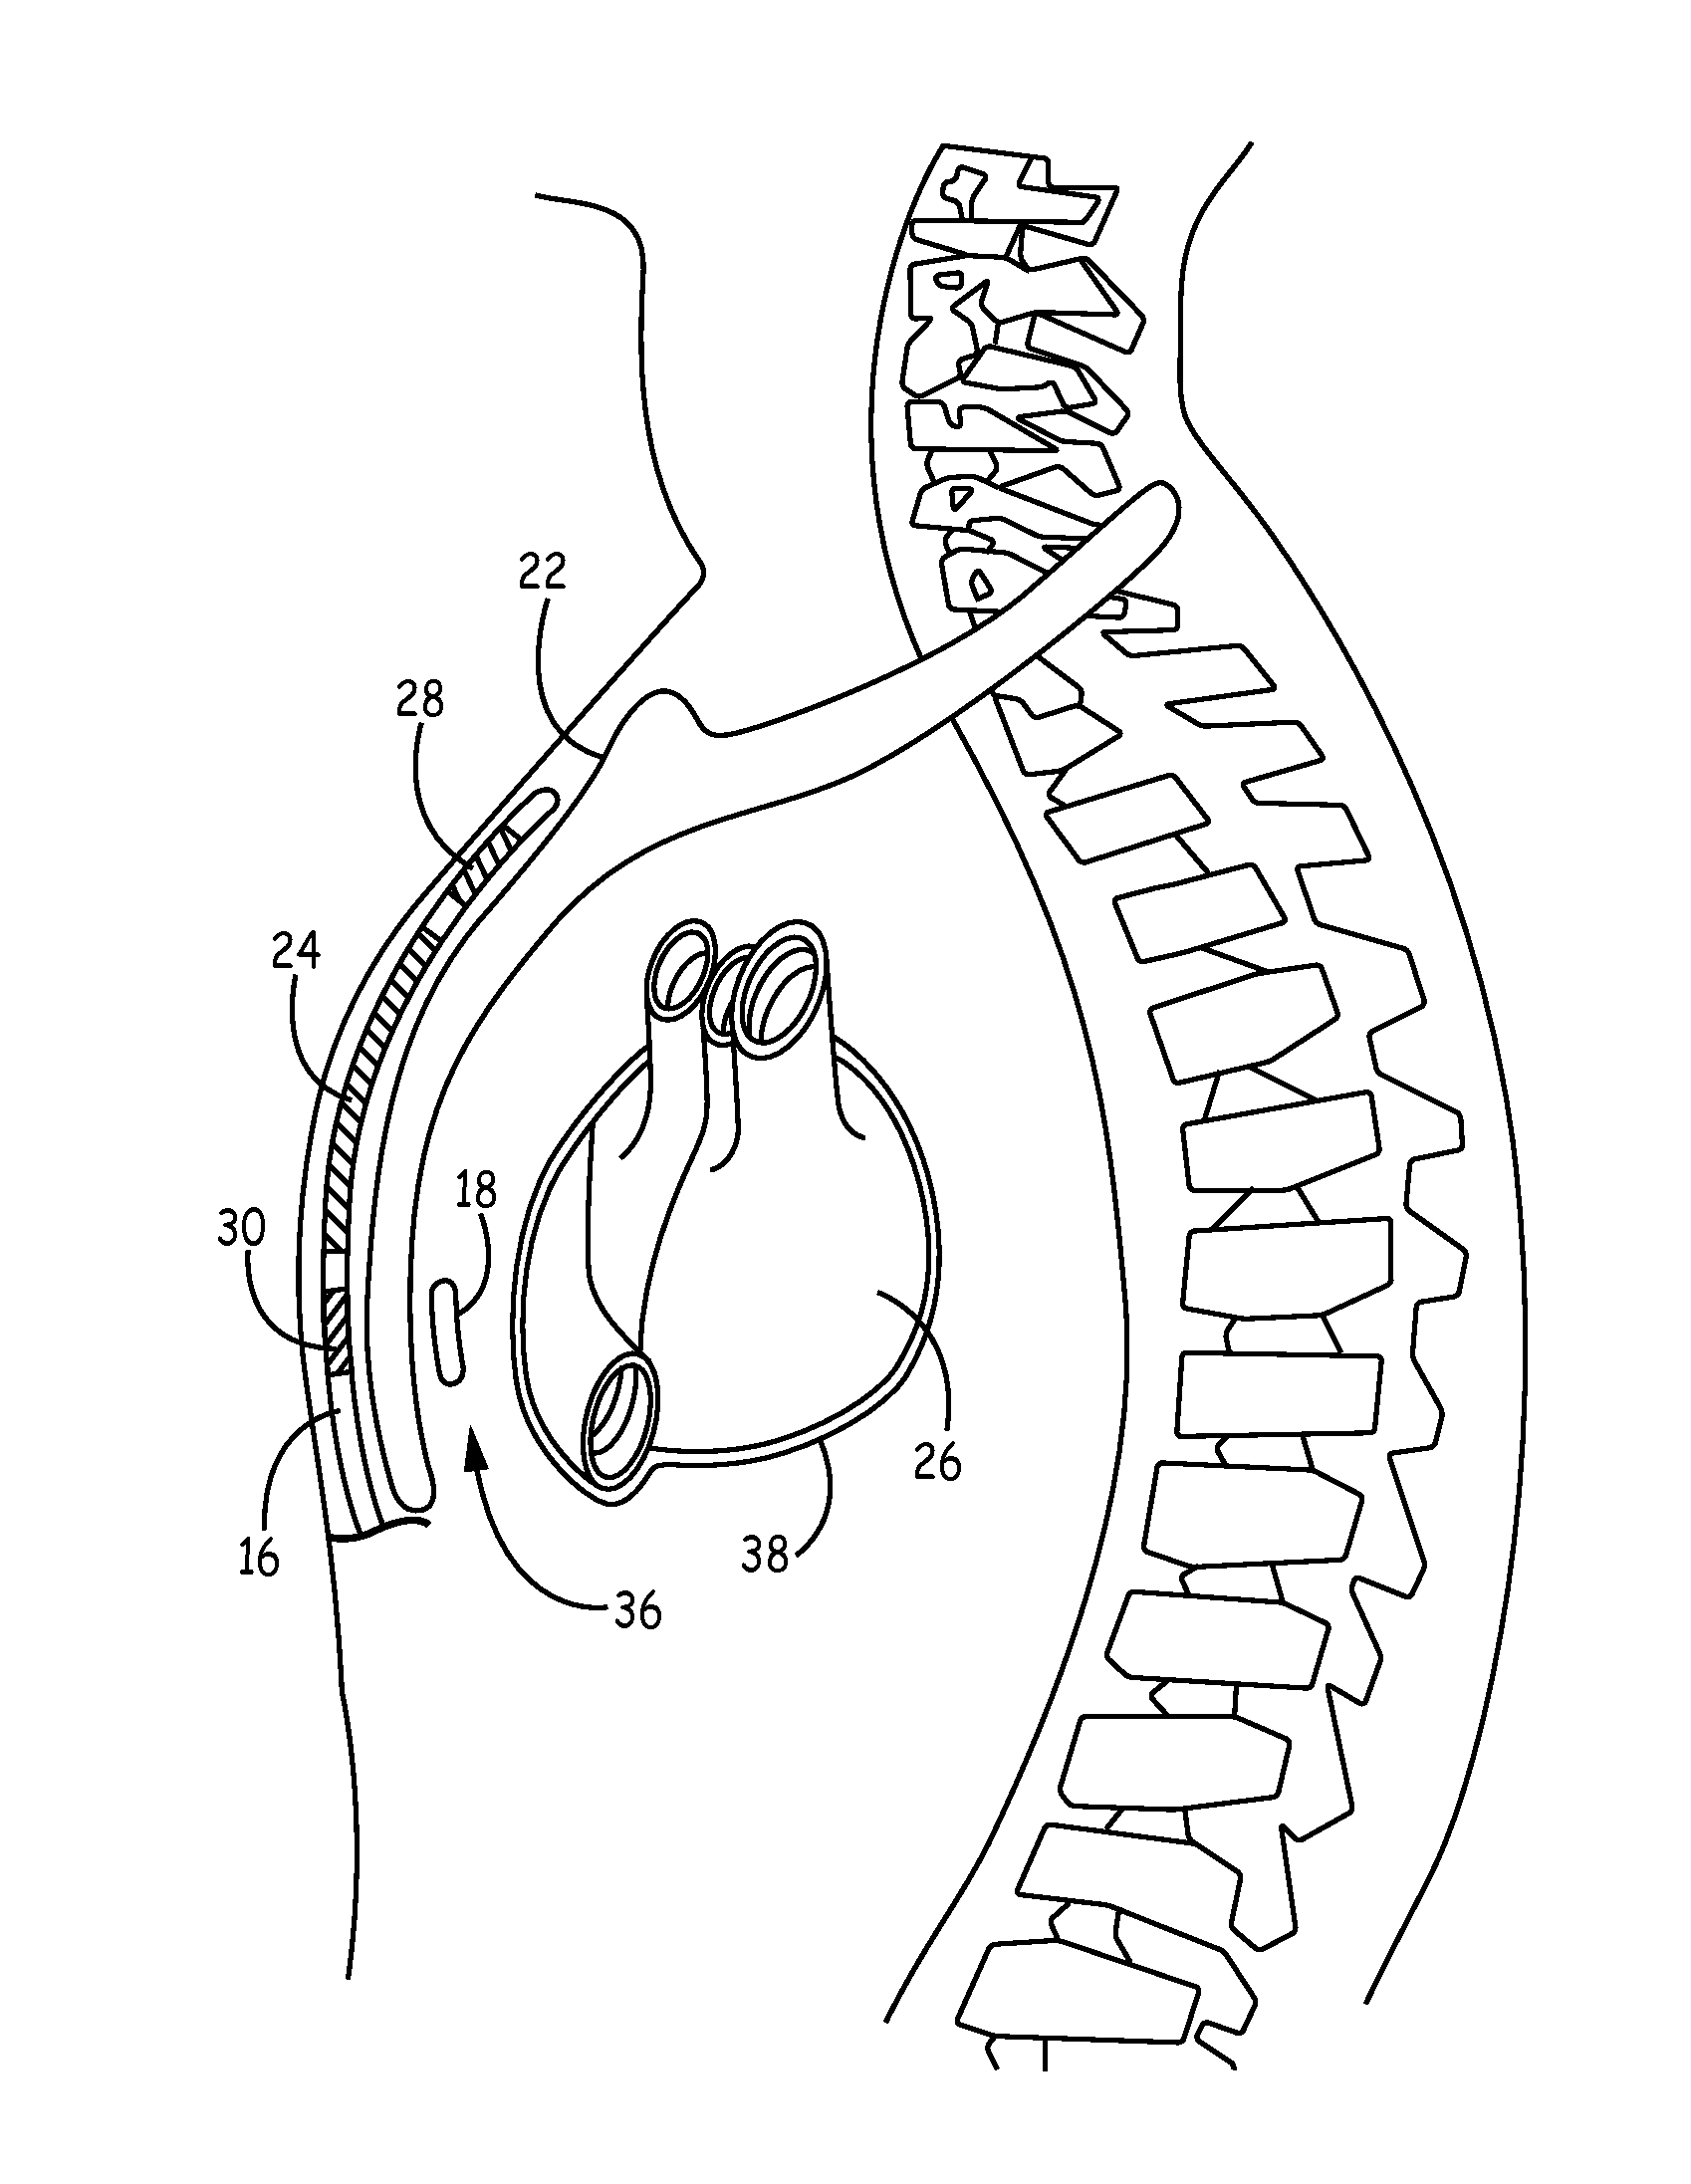 Implantable medical device system having implantable cardioverter-defibrillator (ICD) system and substernal leadless pacing device